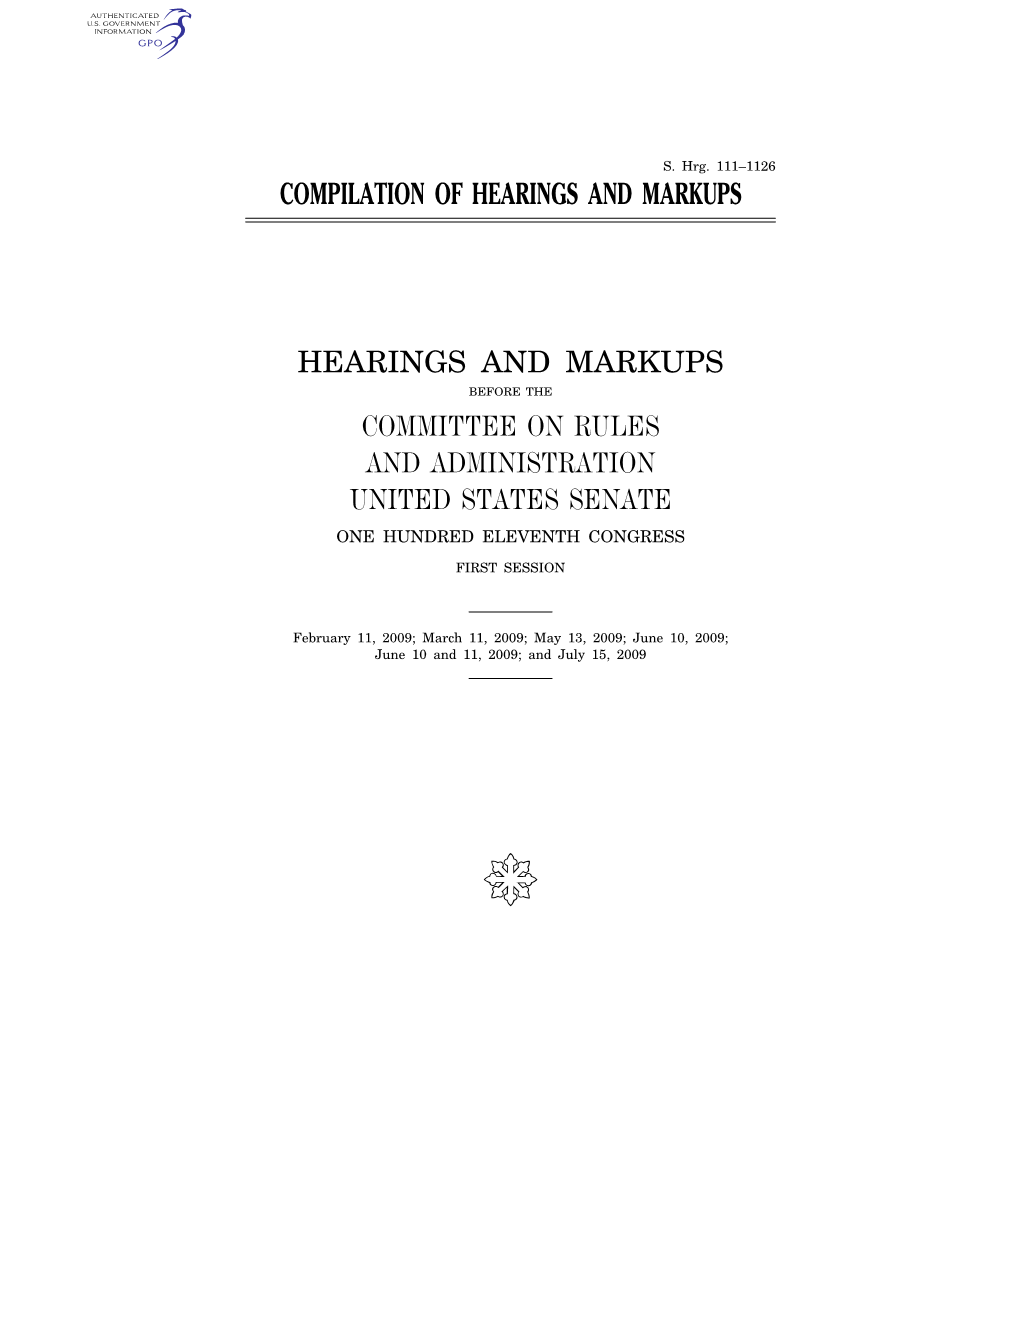 Compilation of Hearings and Markups Hearings And